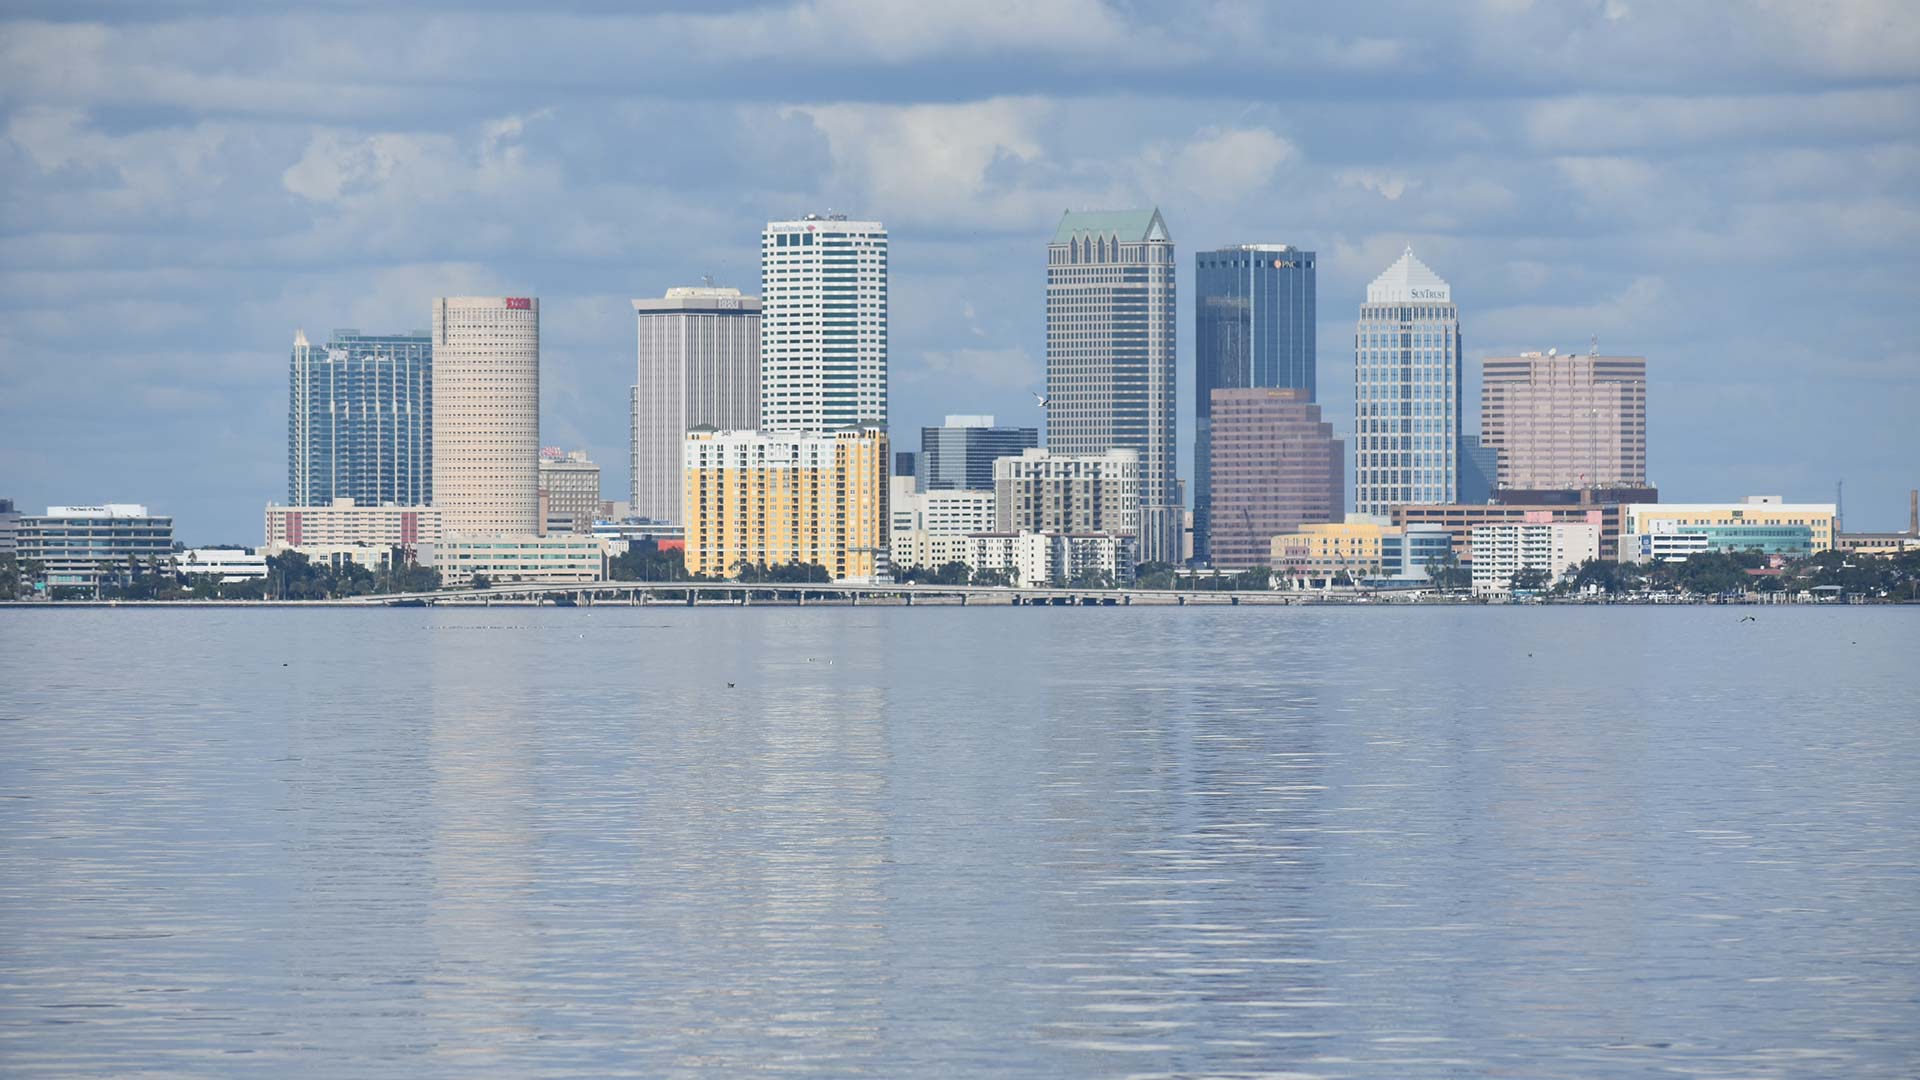 A photo of the Tampa city skyline from Tampa Bay, FL.